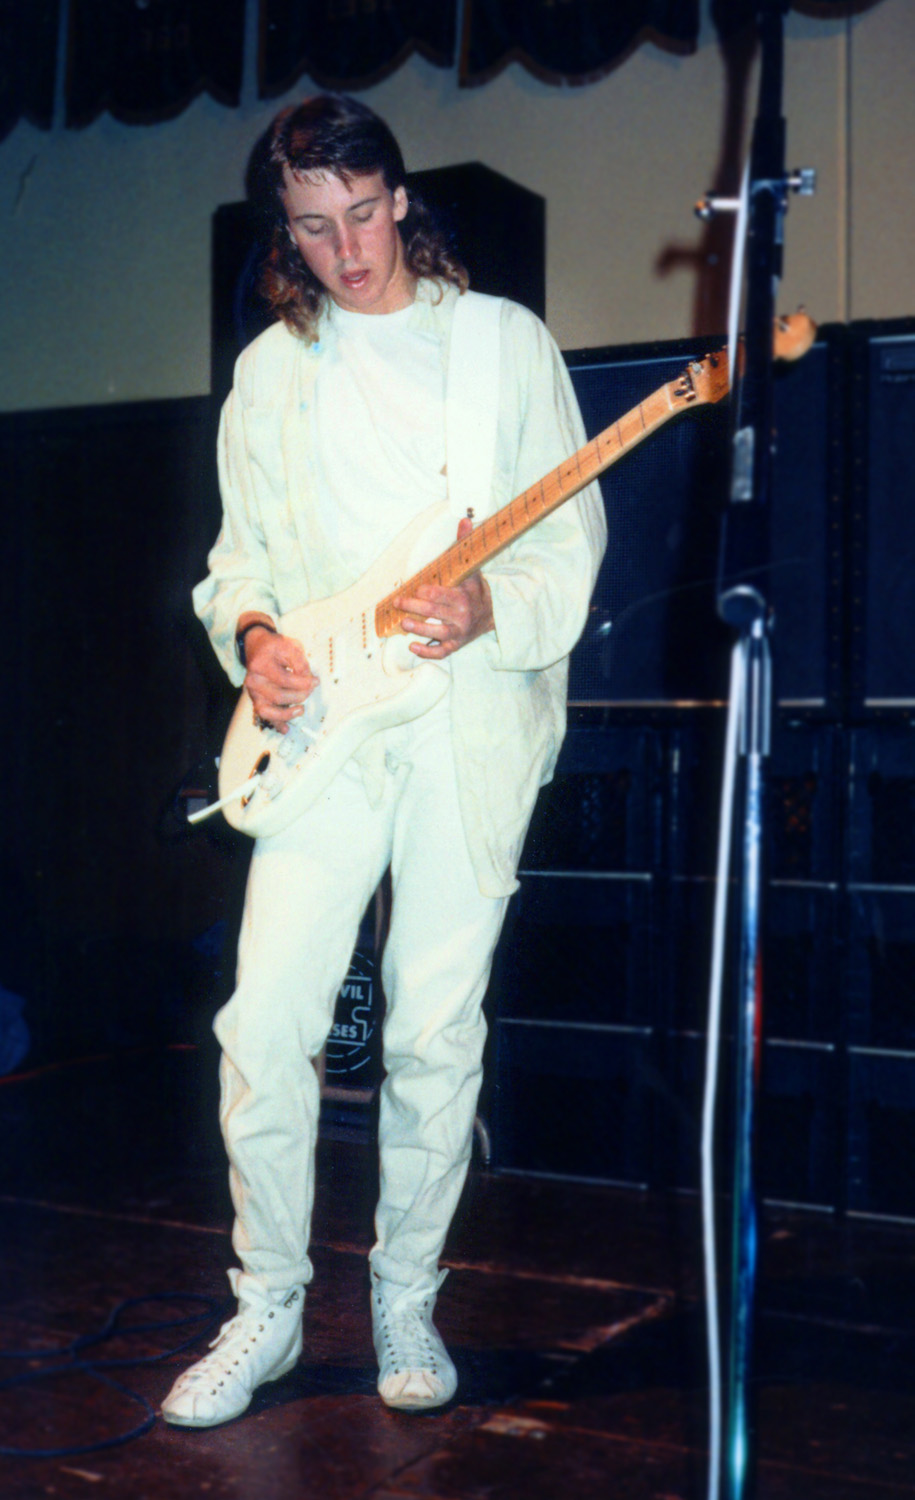 DAVID PERFORMING AT HIS HIGH SCHOOL IN 1988 AT 19 YEARS OLD